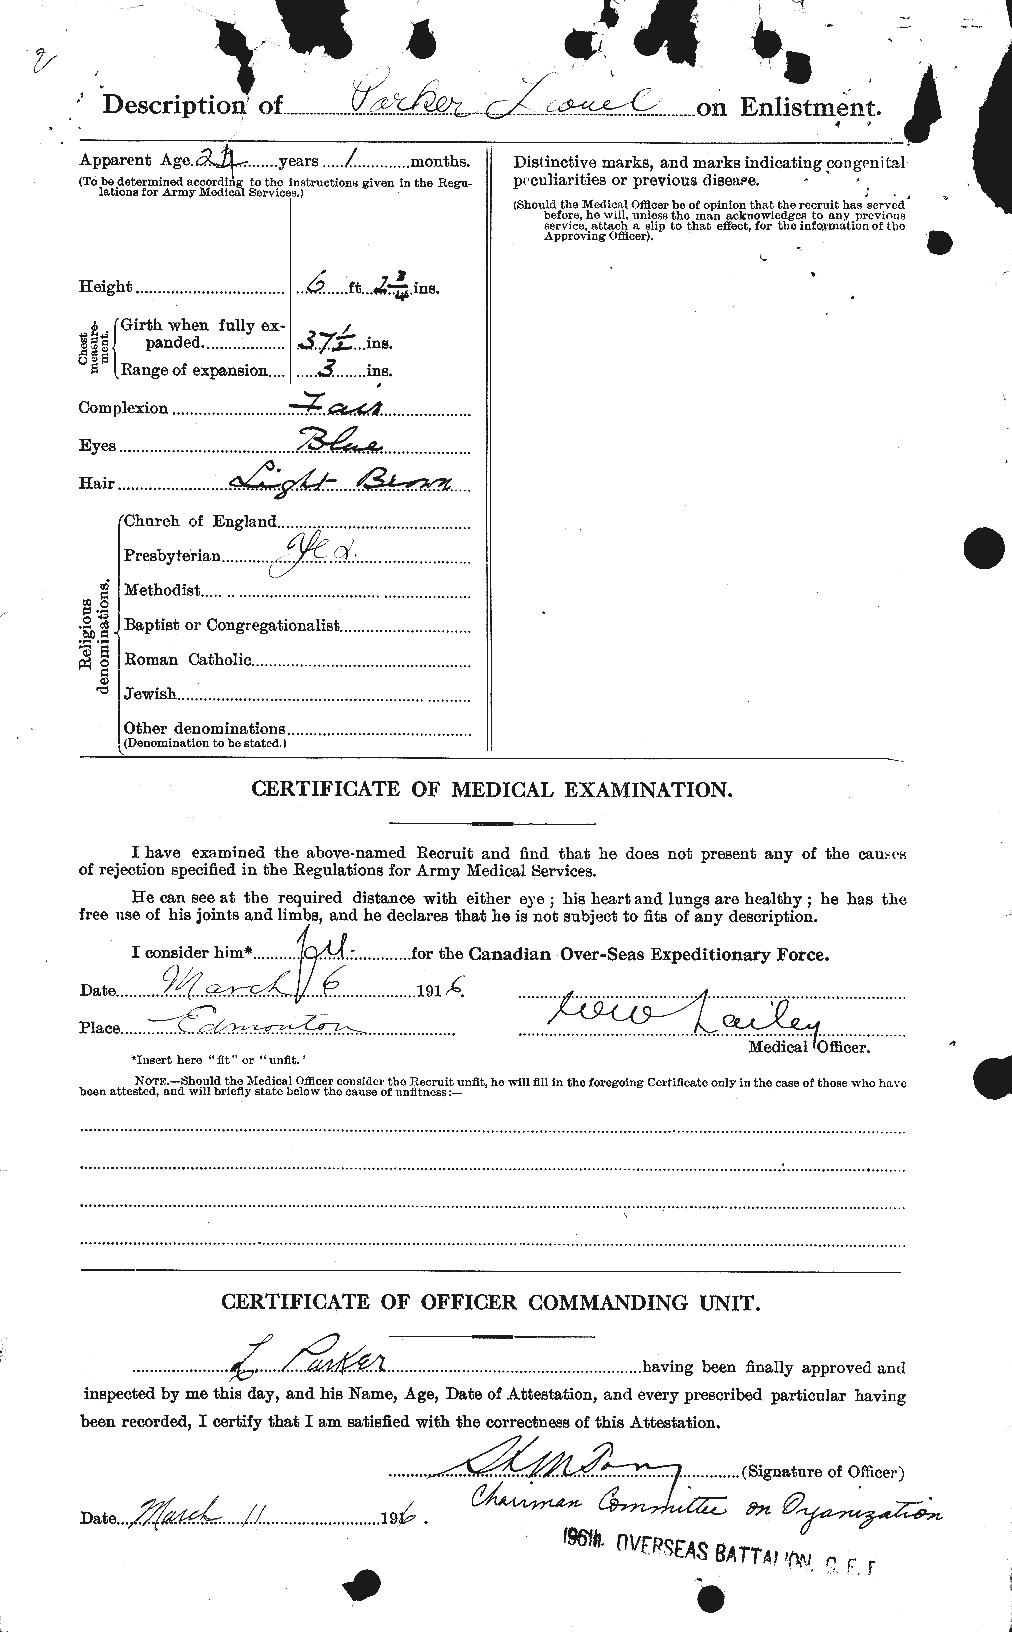 Personnel Records of the First World War - CEF 565533b